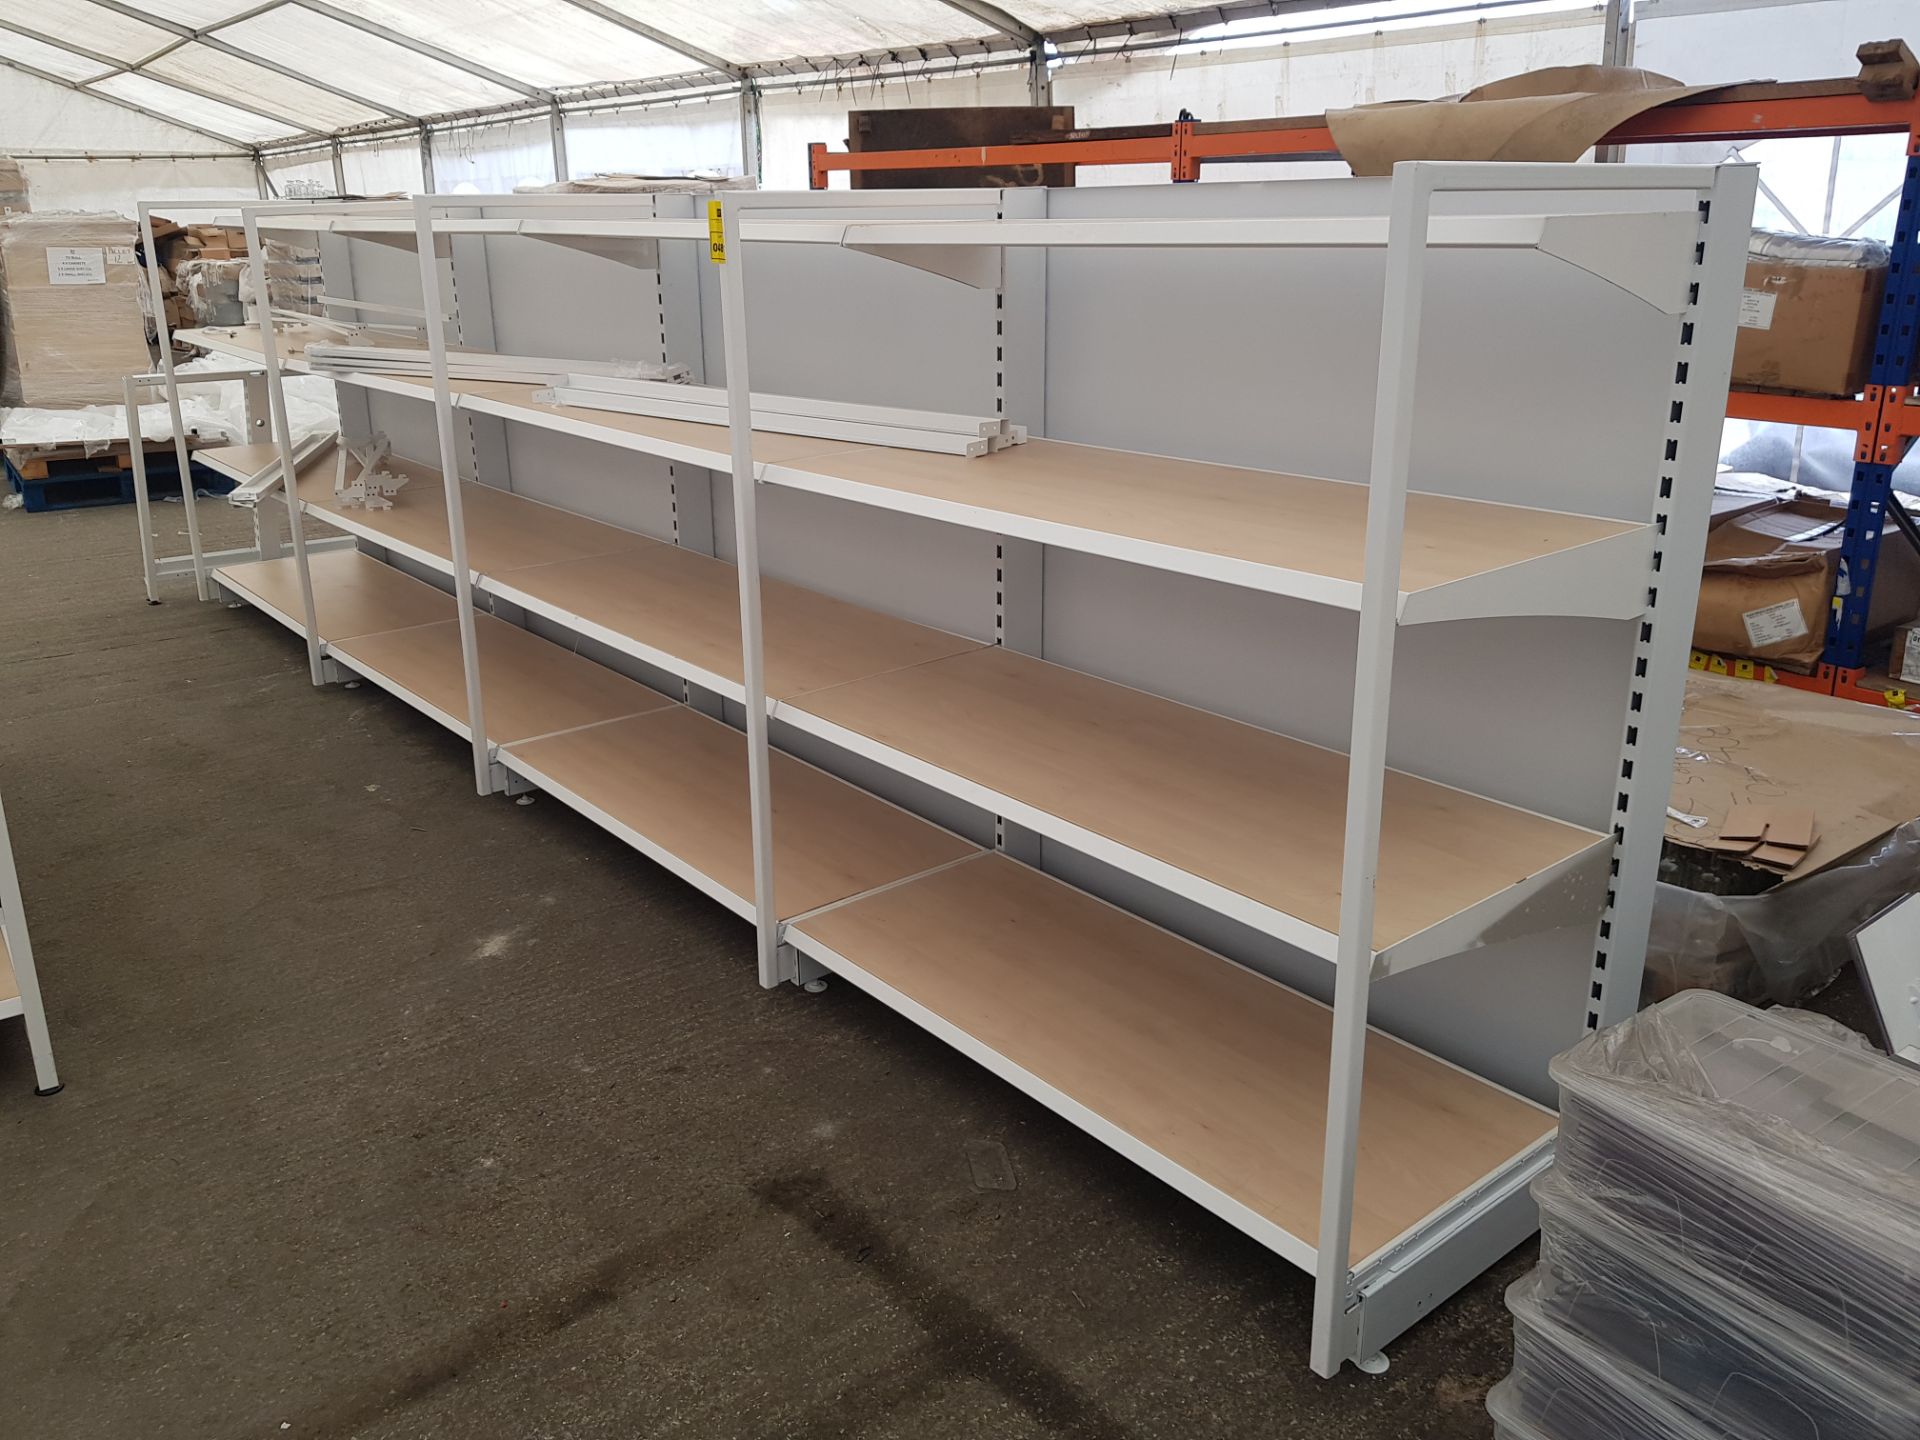 1 X 4 SECTION 4 TIER SHELVING UNIT (1.5m H x 5.35m W x 0.74m D) (5 UPRIGHT COLUMNS & 16 SHELVES WITH